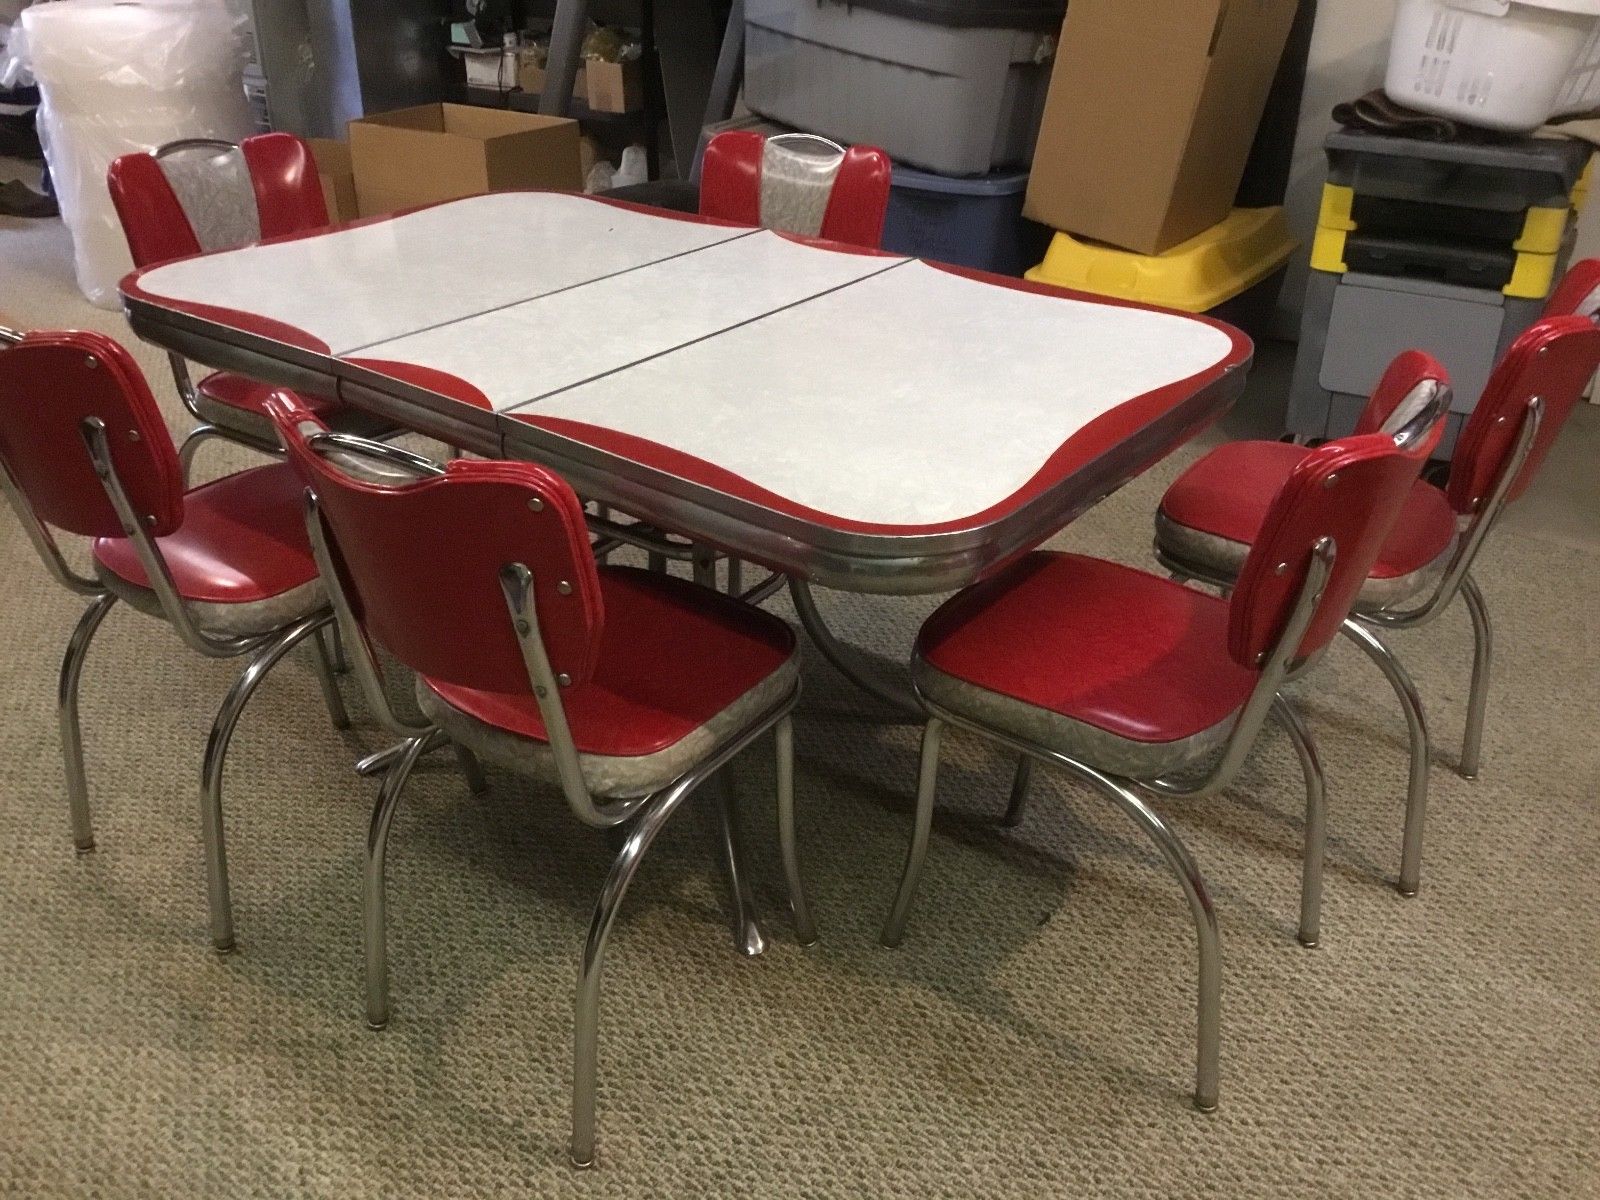 1950 kitchen table with chrome